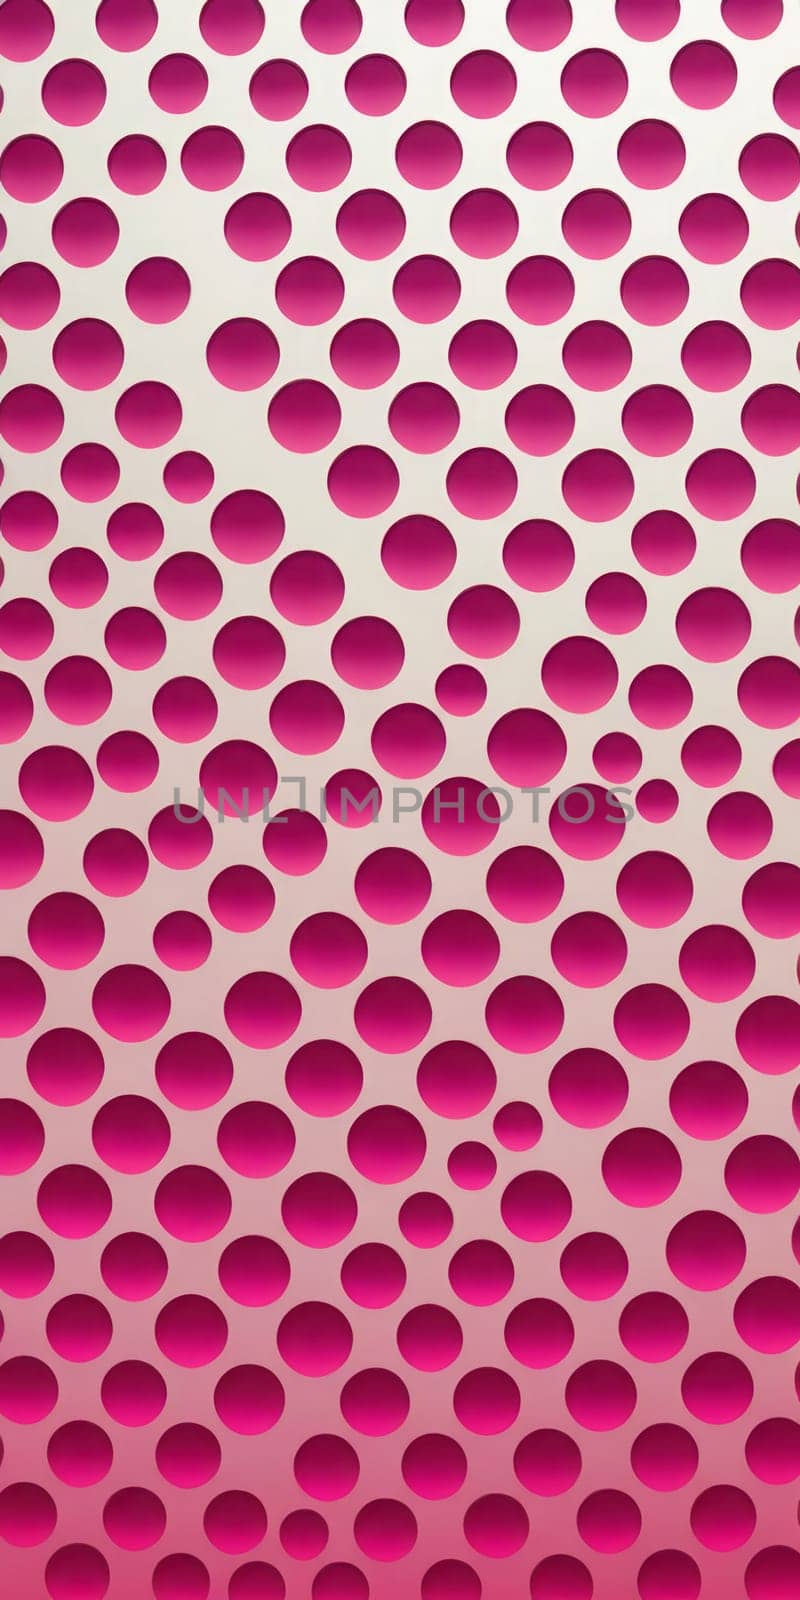 Perforated Shapes in Fuchsia Antiquewhite by nkotlyar